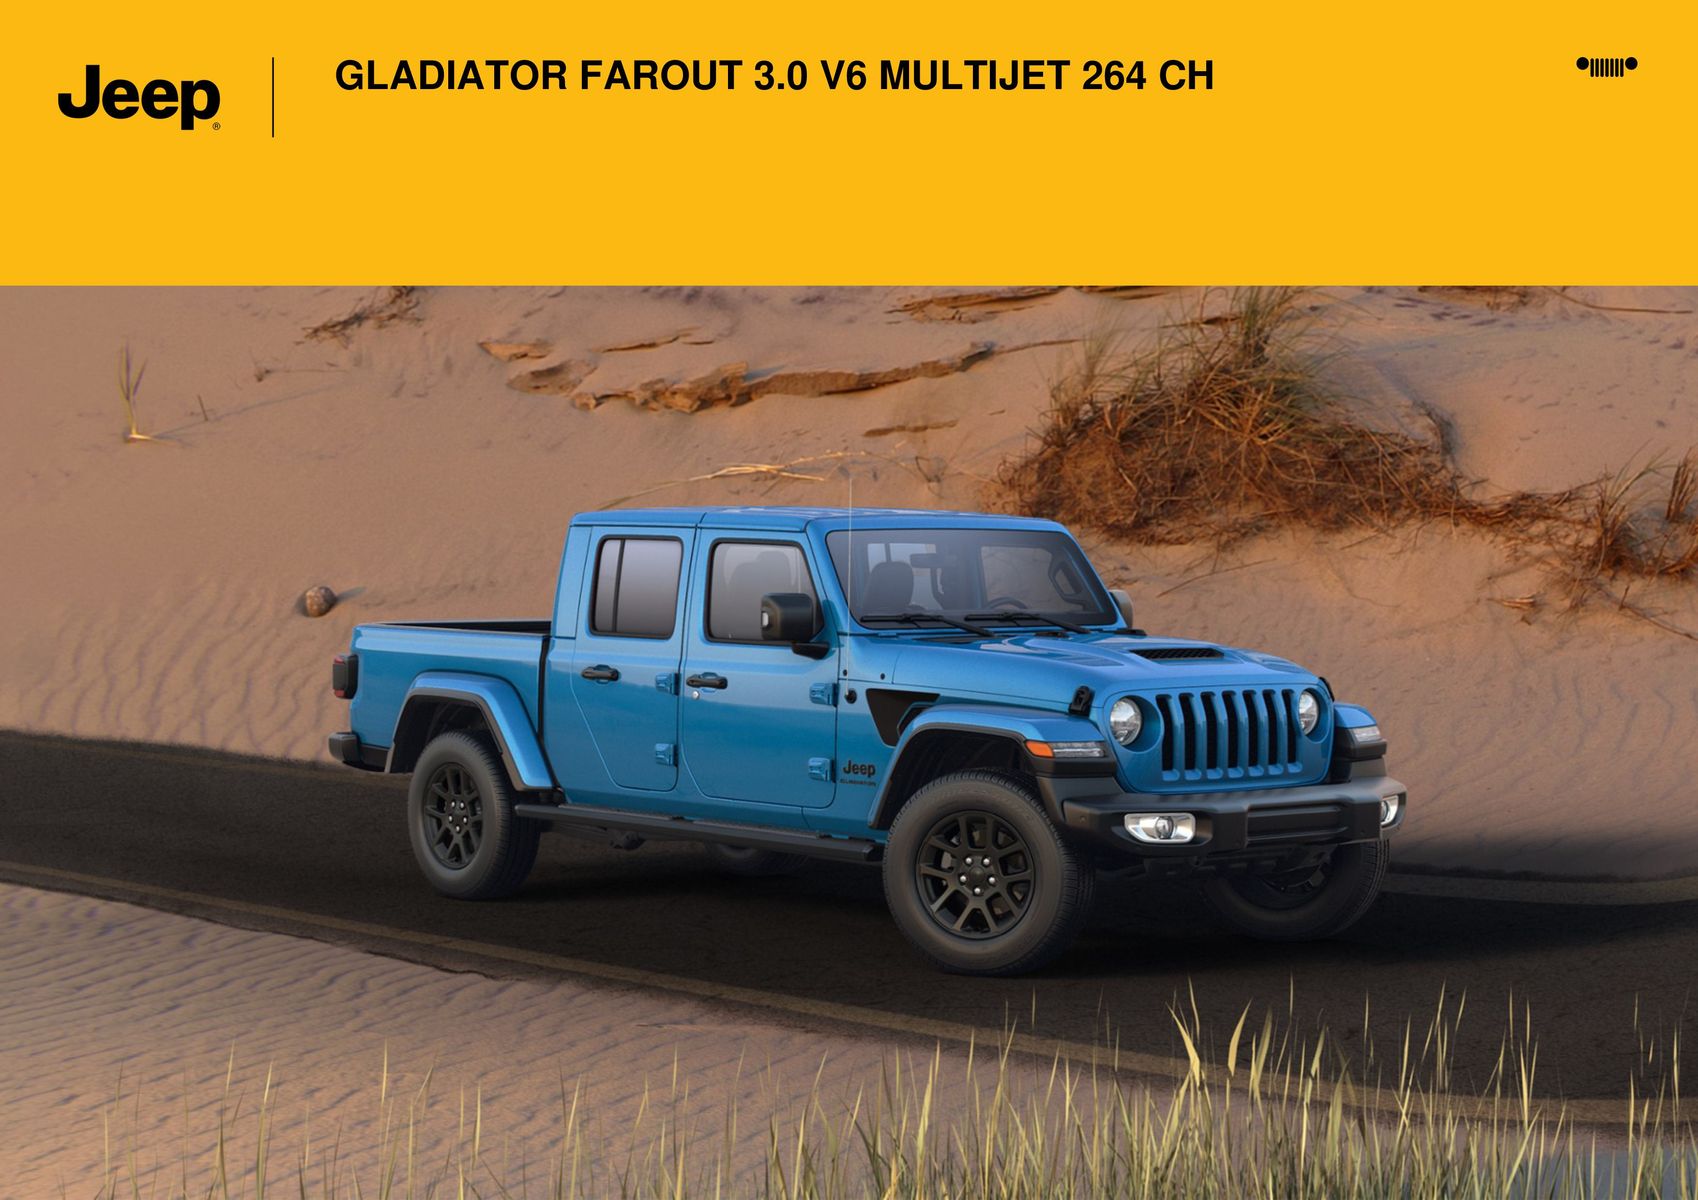 Catalogue GLADIATOR FAROUT 3.0 V6 MULTIJET 264 CH-, page 00001